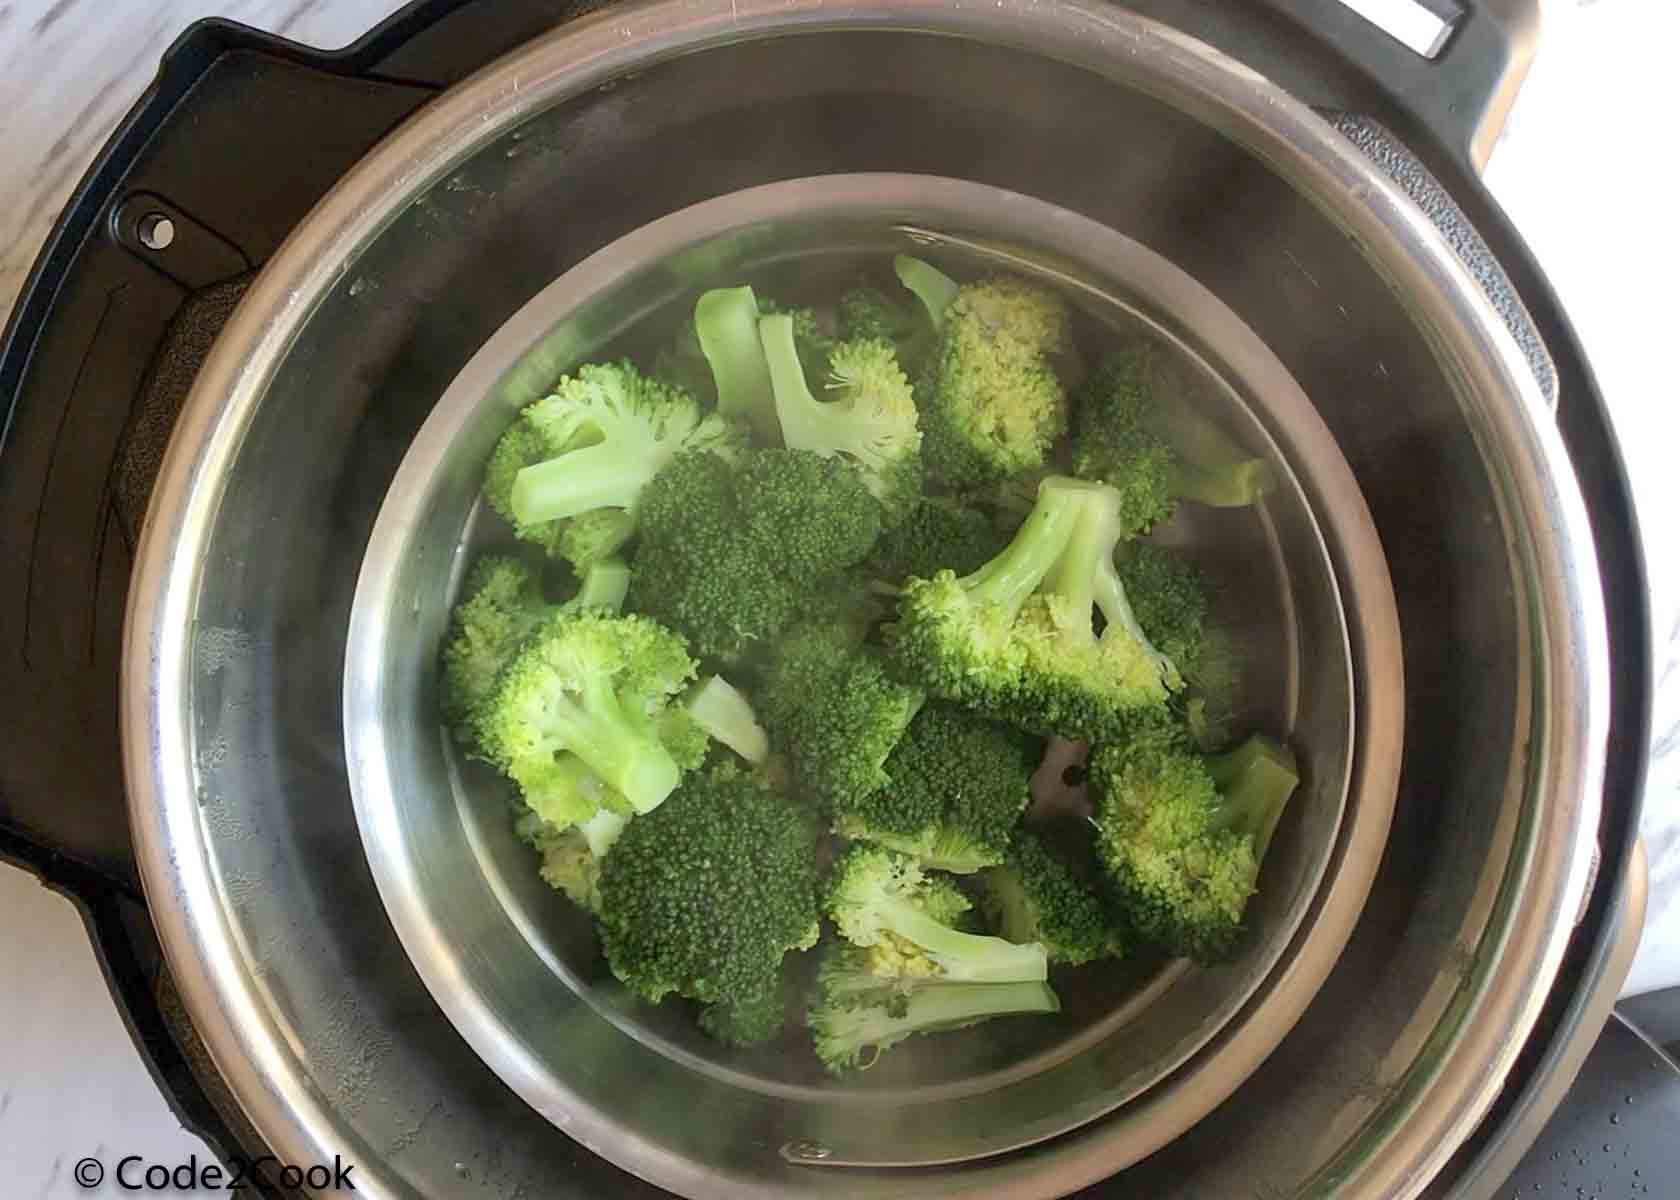 steamed broccoli as soon as opened the lid